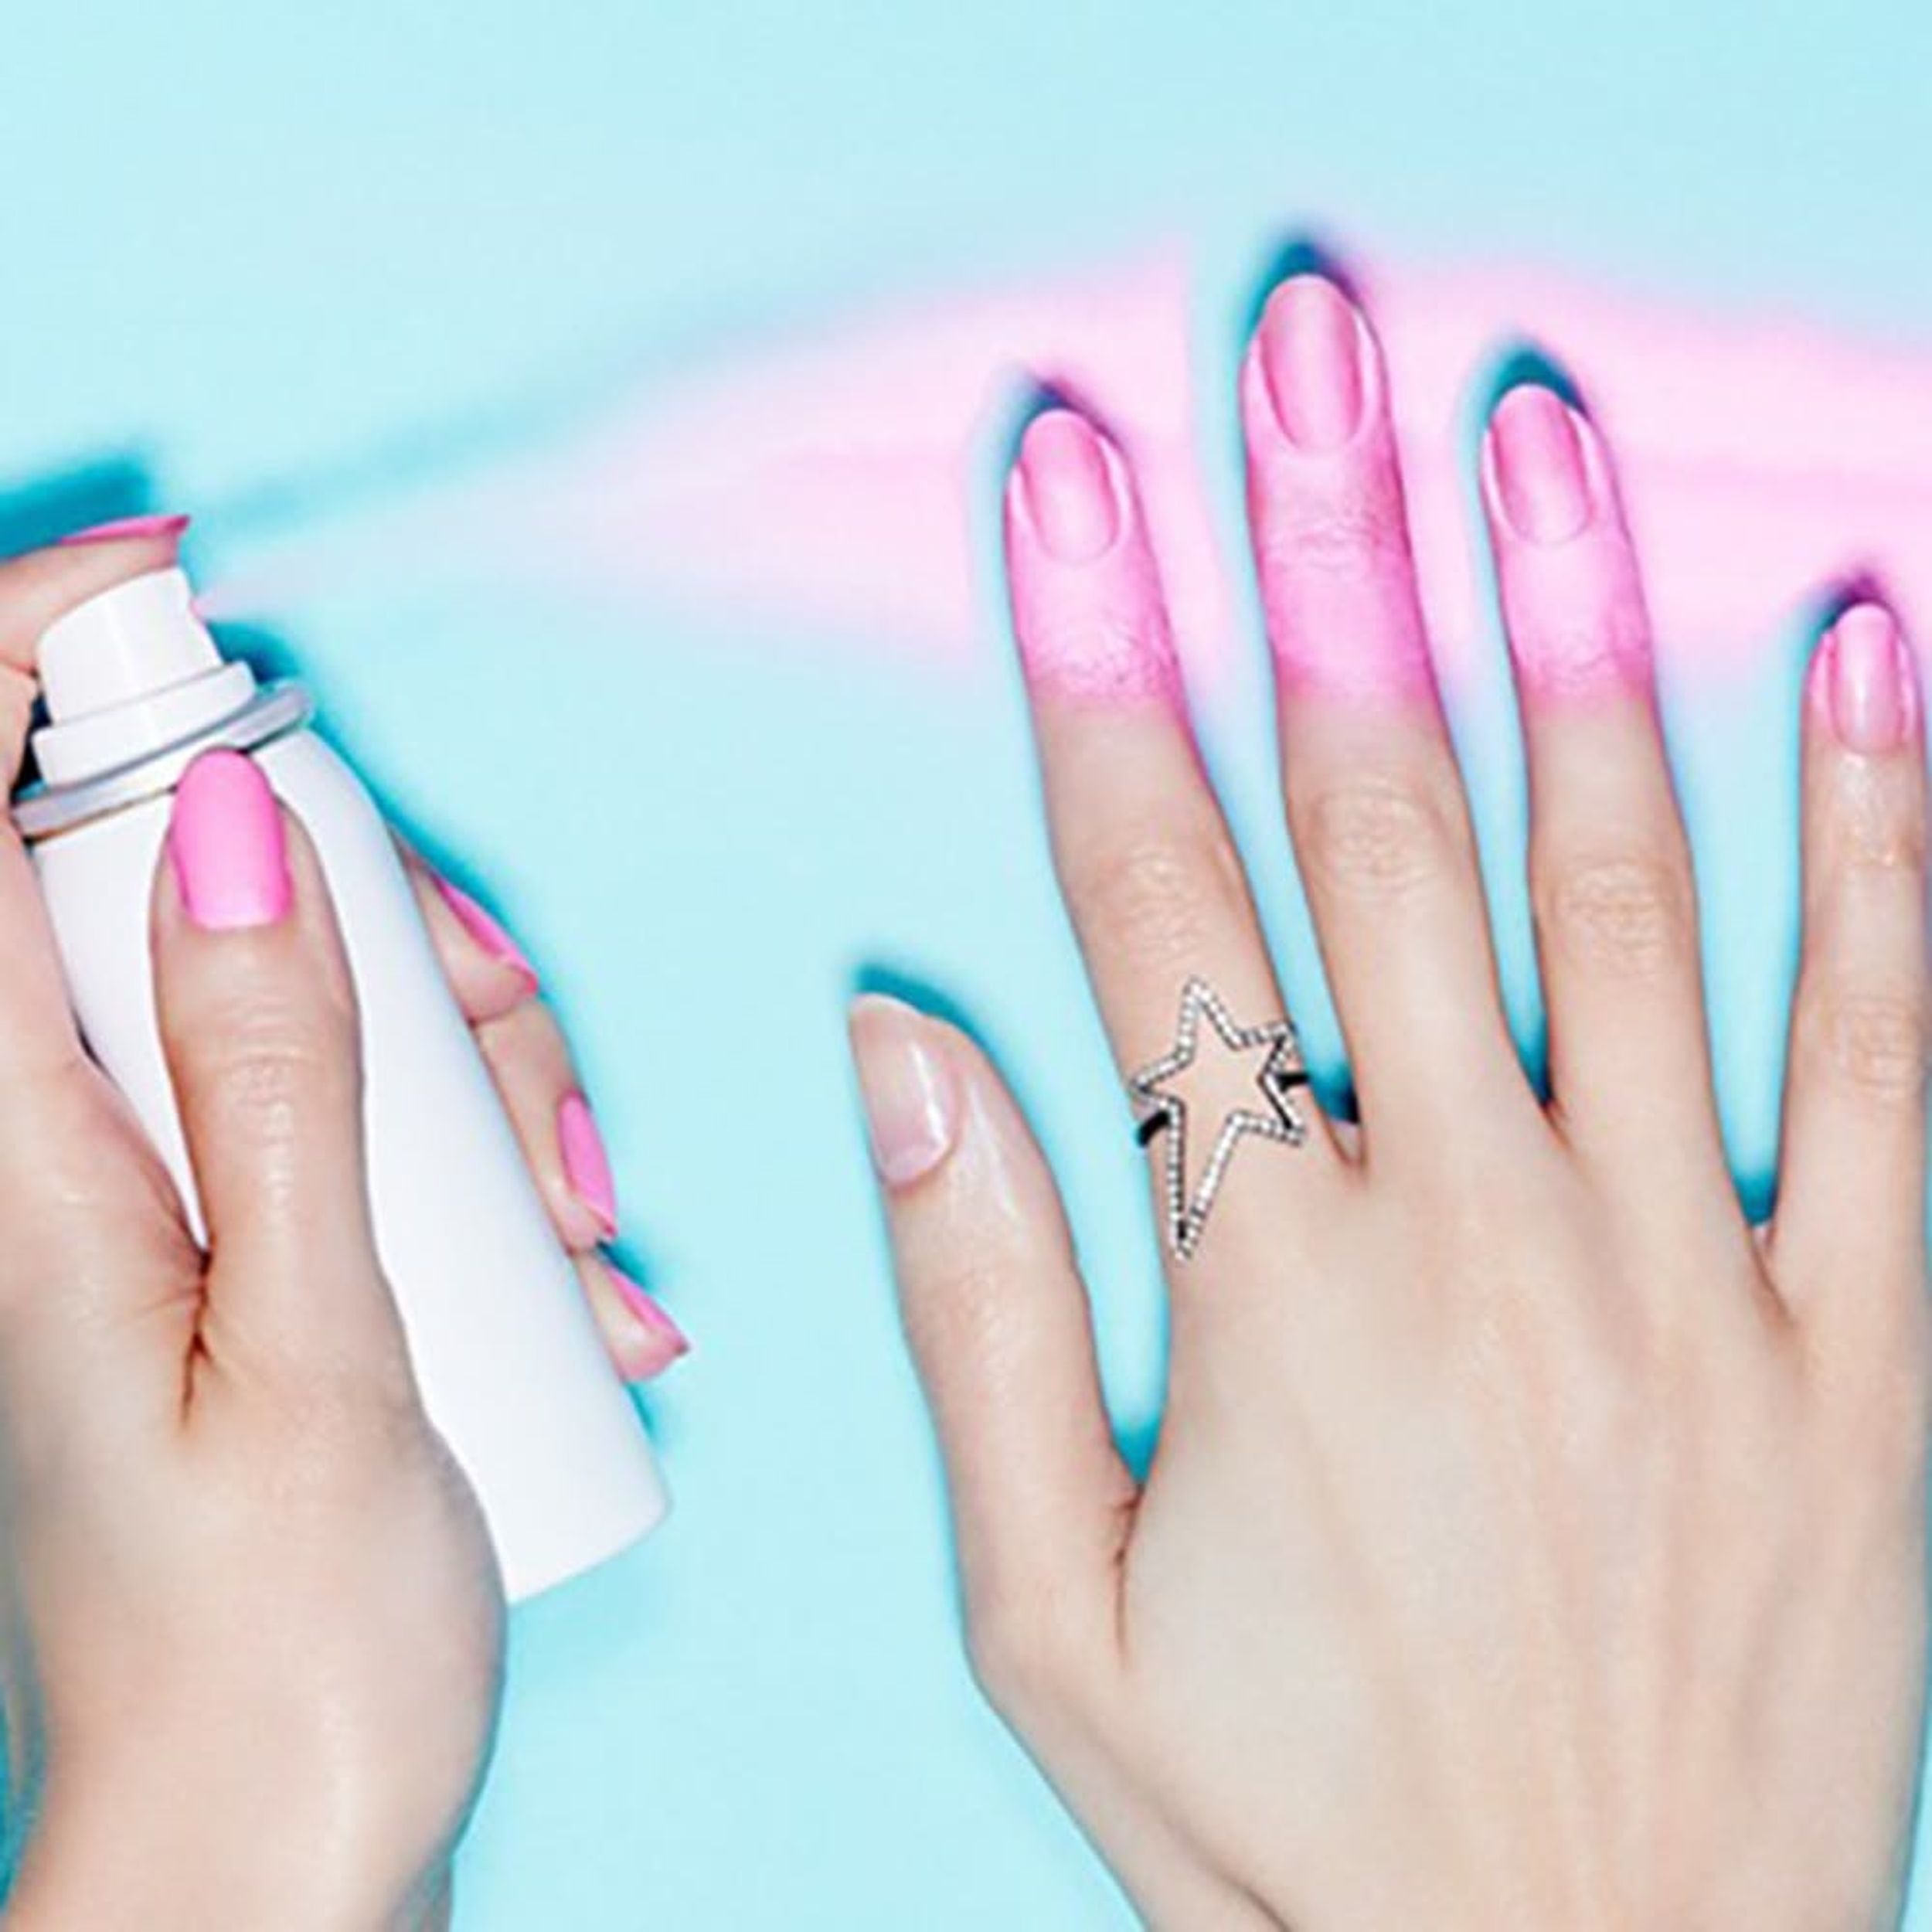 This Crazy New Beauty Product Lets You *Spray* on Your Manicure